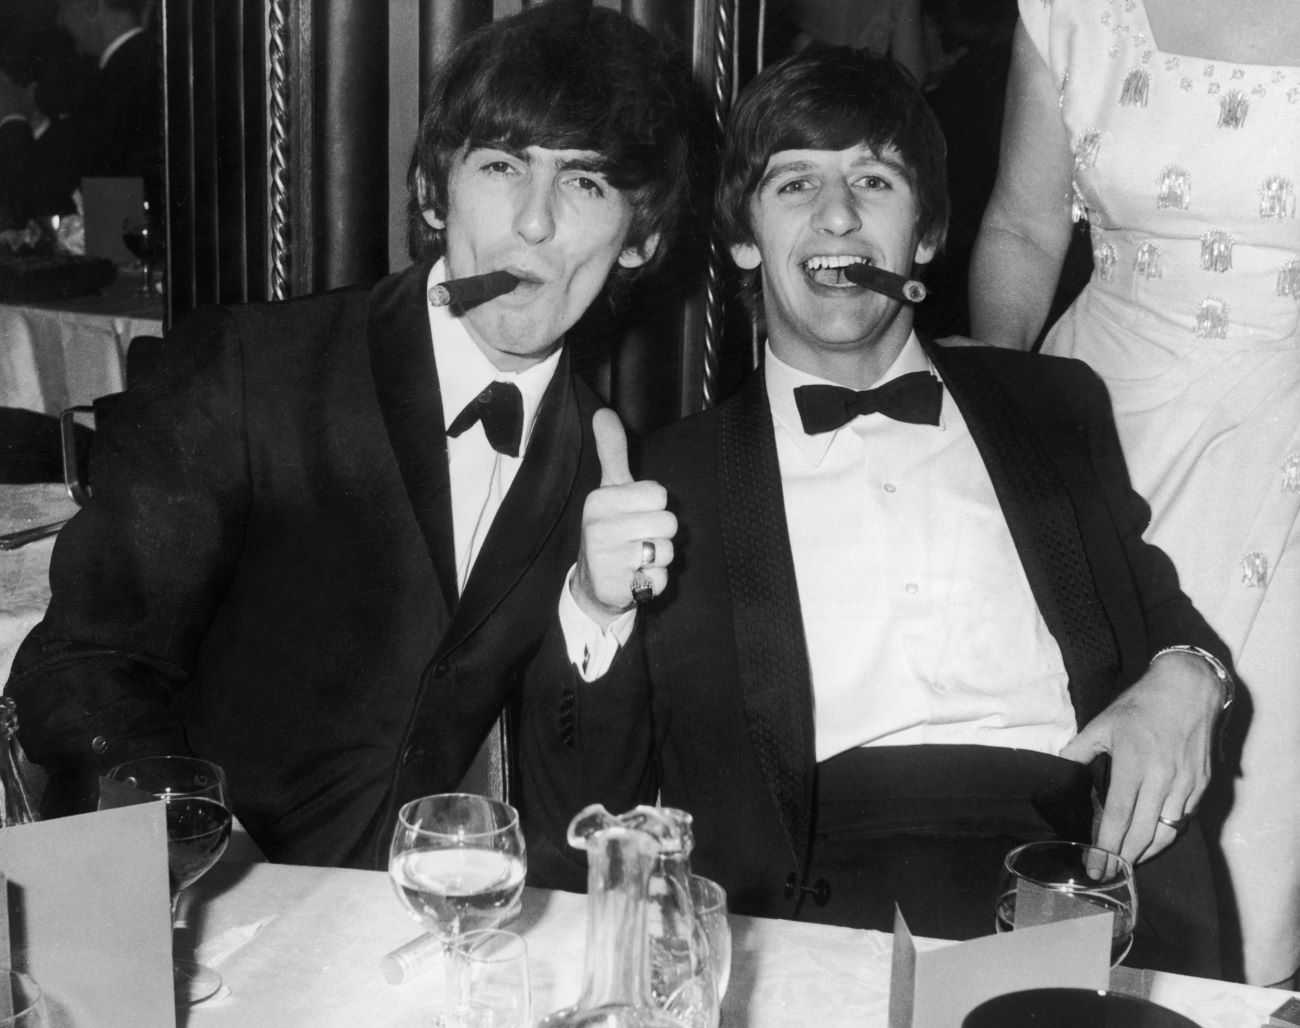 A black and white photo of George Harrison and Ringo Starr sitting at a table with cigars in their mouths.